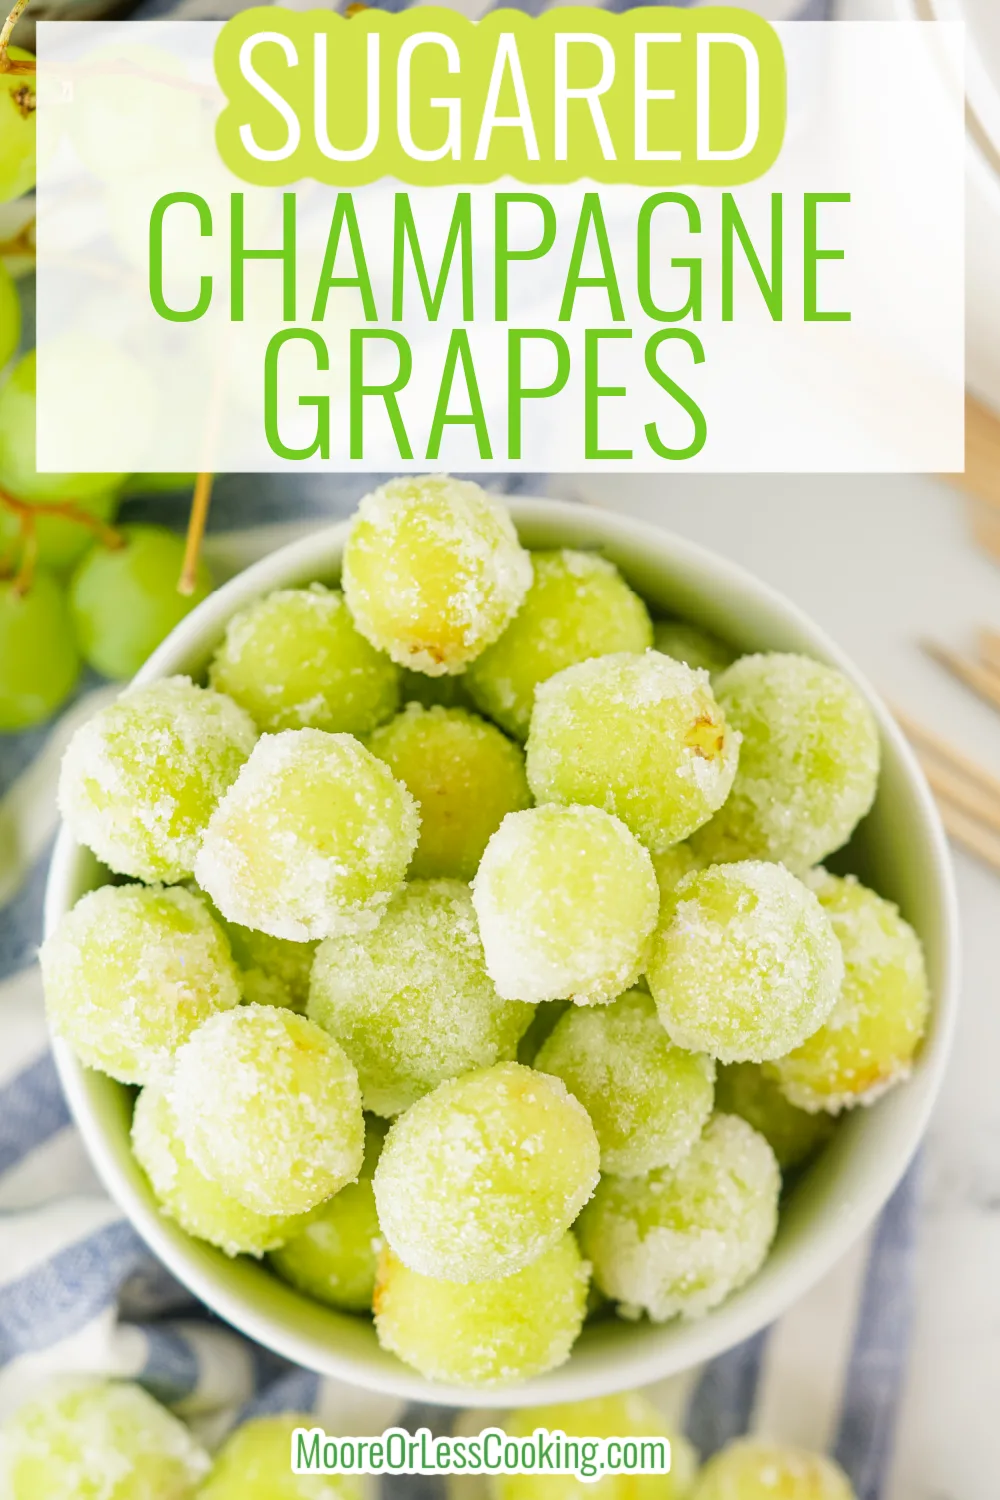 You'll love how simple it is to make these Sugared Champagne Grapes - they need just 3 ingredients! They're a make-ahead effort because the seedless grapes need to soak in the champagne overnight. Then, just roll them in sugar and freeze for a few hours to let the sugar crystallize. Serve these beautiful grapes on your holiday table and watch them disappear in a flash! via @Mooreorlesscook